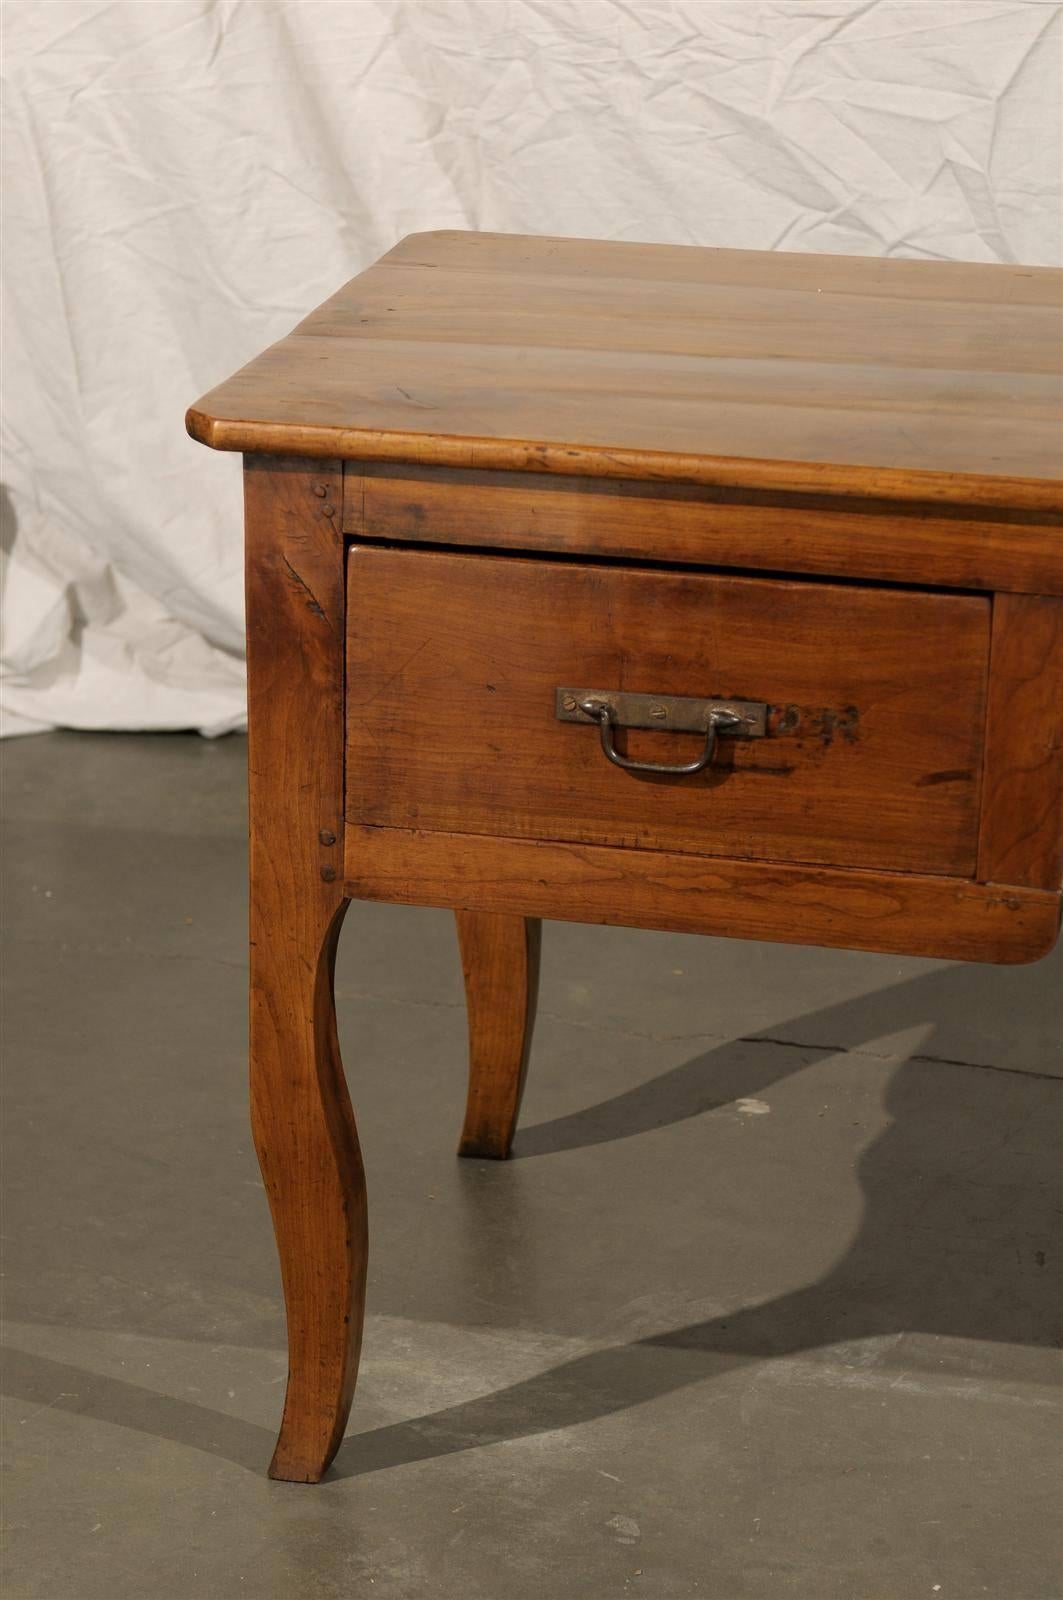 18th-19th Century French Provincial Fruitwood Desk
68